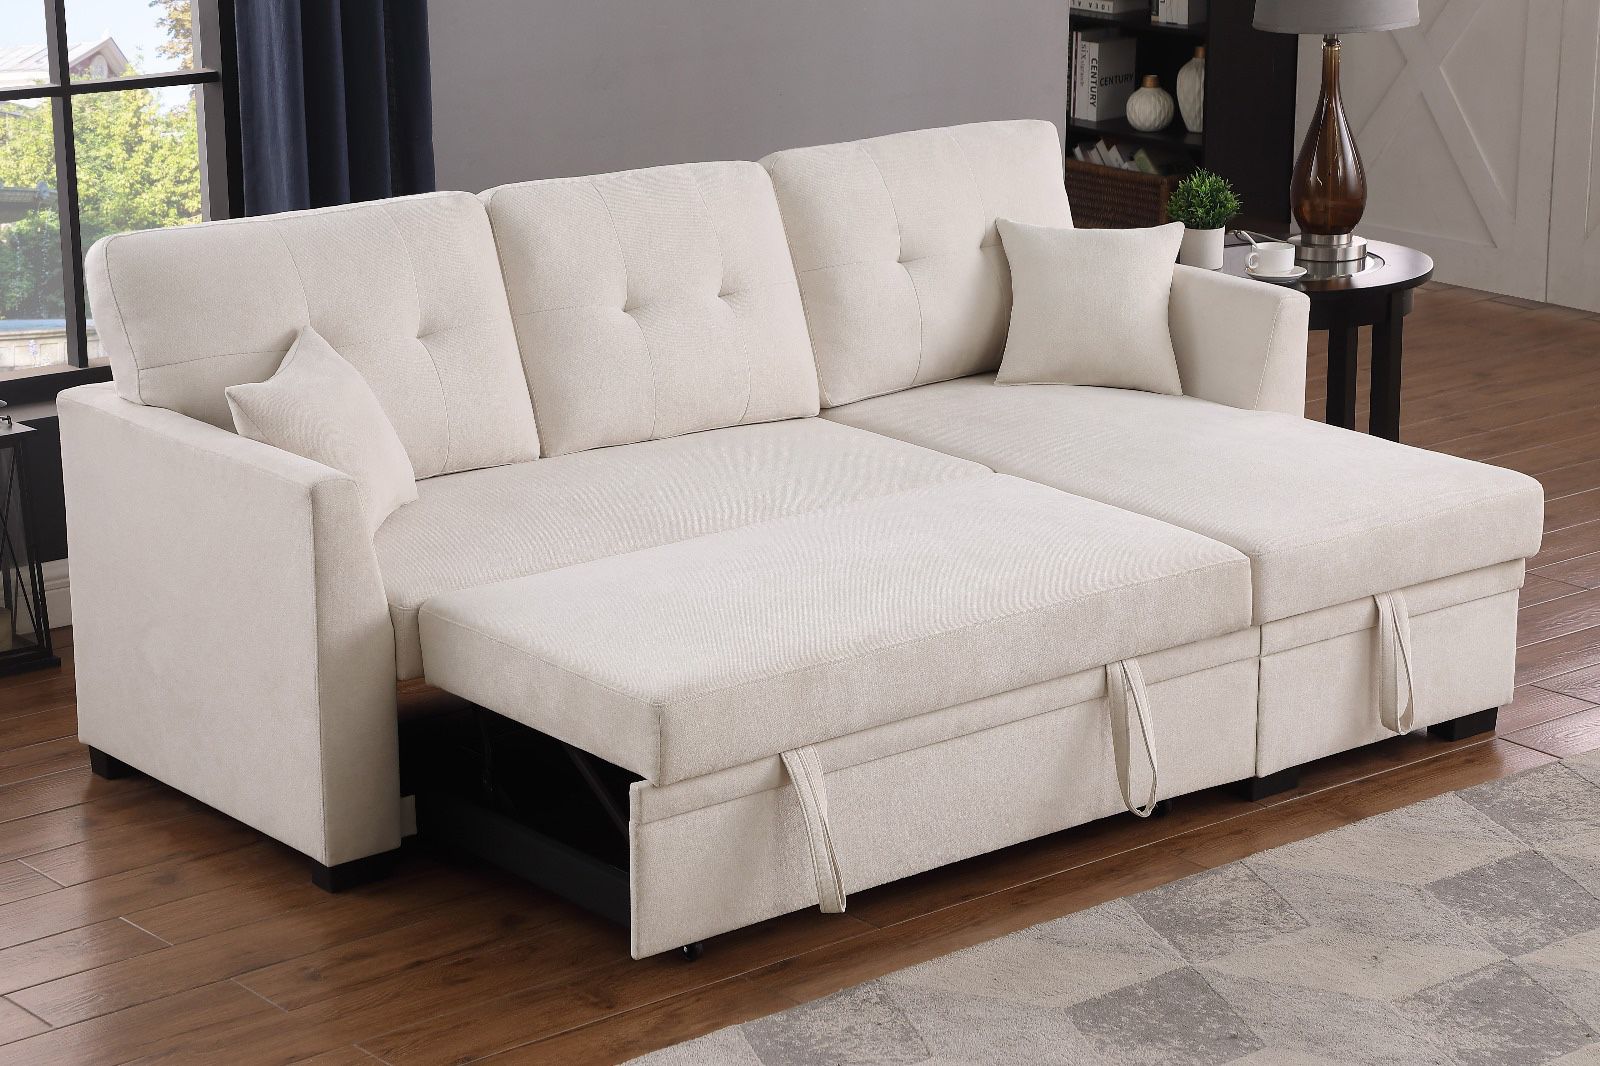 New! Premium Fabric Beige Sectional Sofa Bed, Sectional, Sectionals, Sectional Couch, Sofabed, Sofa Bed, Sectional Sofa With Pull Out Bed,l